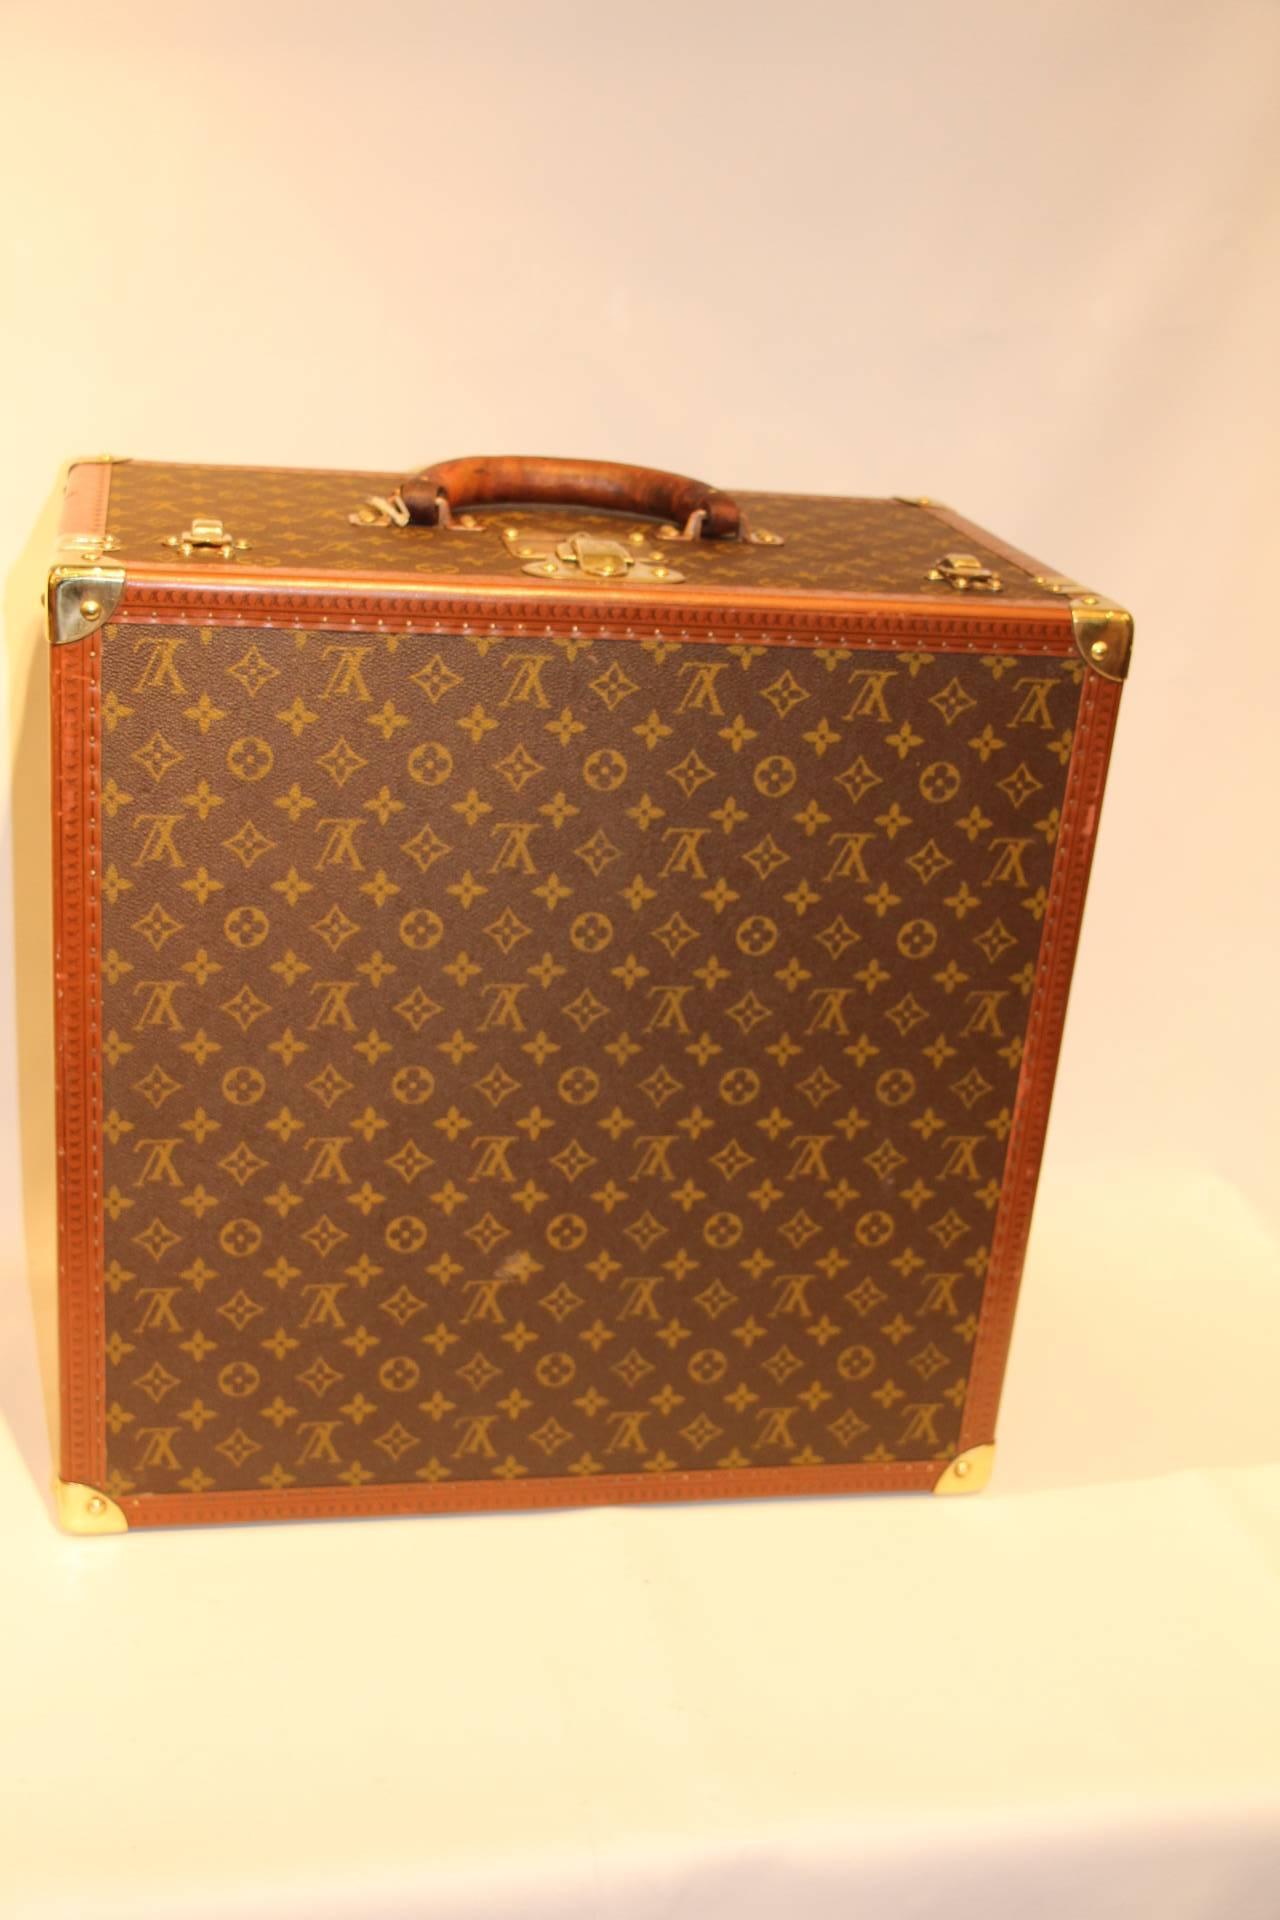 This beautiful Louis Vuitton hat box features monogram canvas,brass fittings and leather handle.
Interior is in perfect condition with its removable webb basket.
It could be used as a small coffee table or side table as well as for travel.